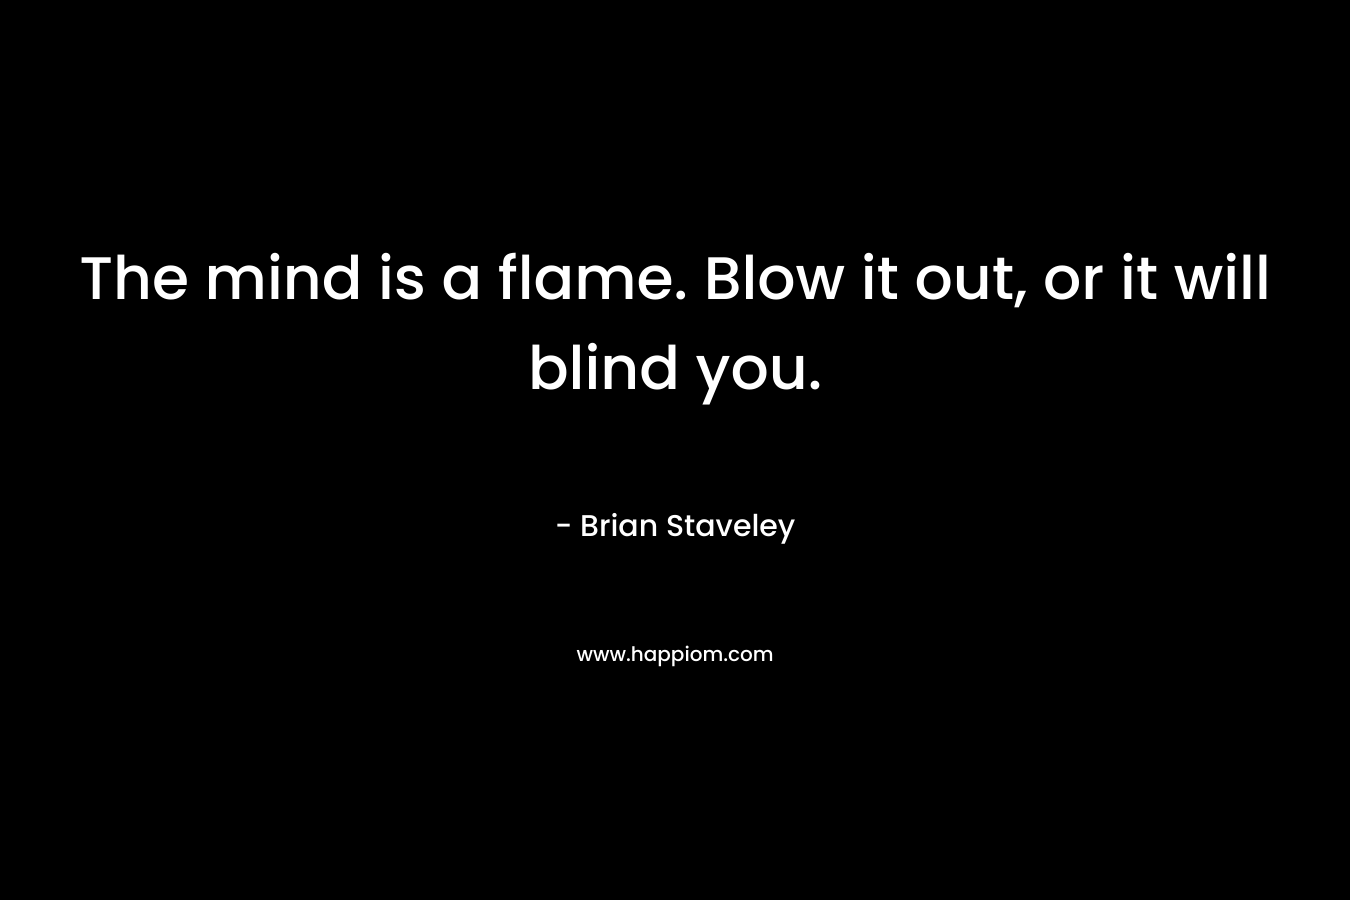 The mind is a flame. Blow it out, or it will blind you. – Brian Staveley